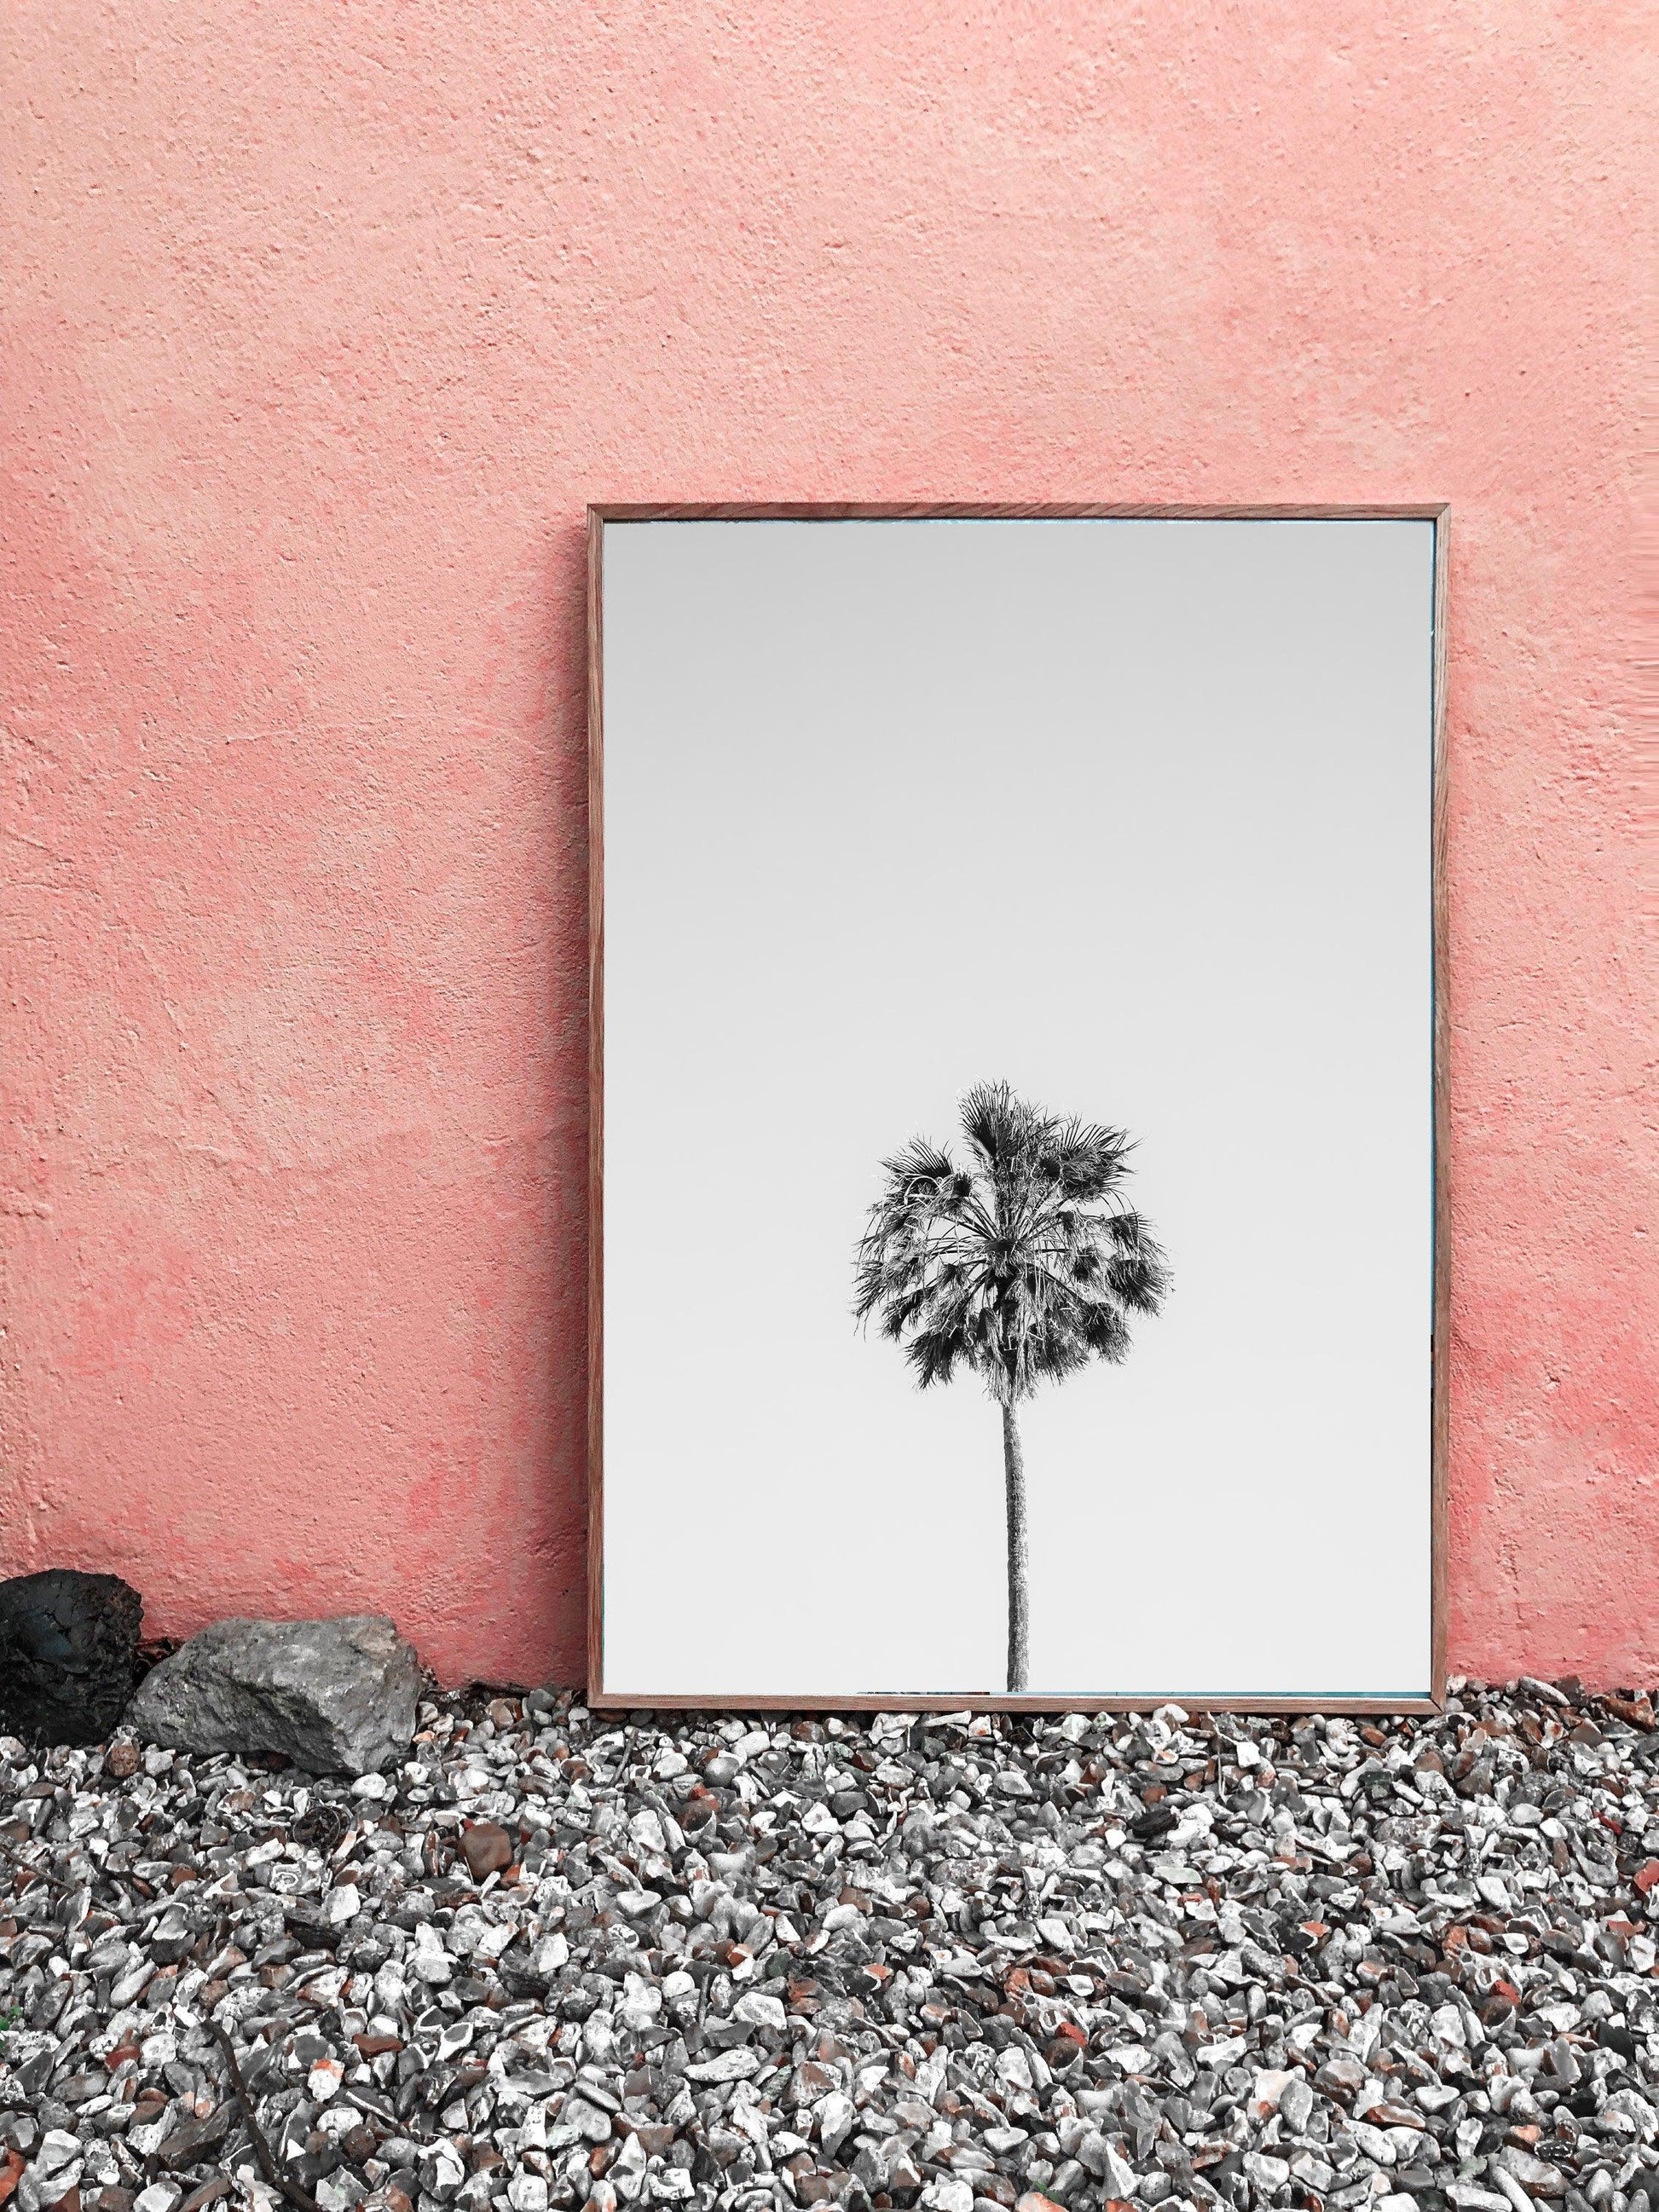 Black and White Palm Tree III | Beach Photography Print - Departures Print Shop